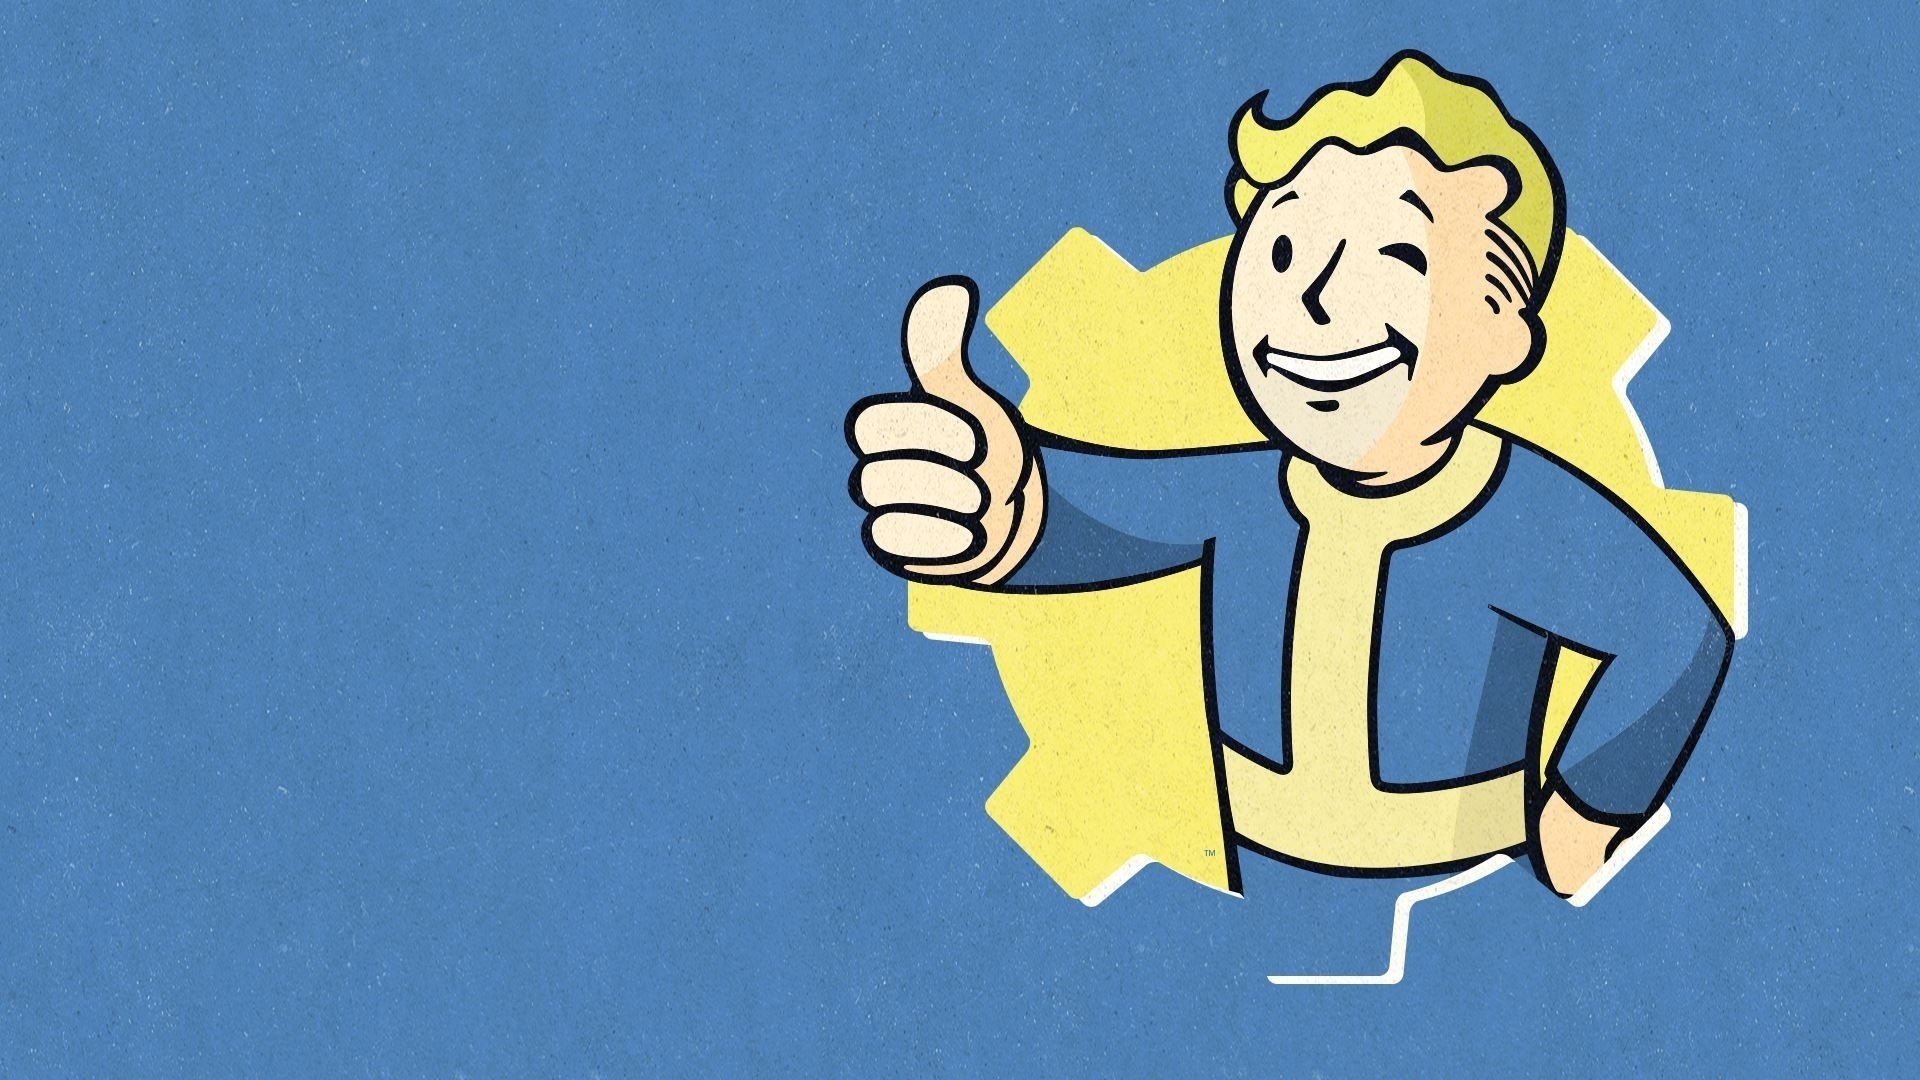 10 Top Vault Boy Wallpaper Hd FULL HD 1920×1080 For PC Background